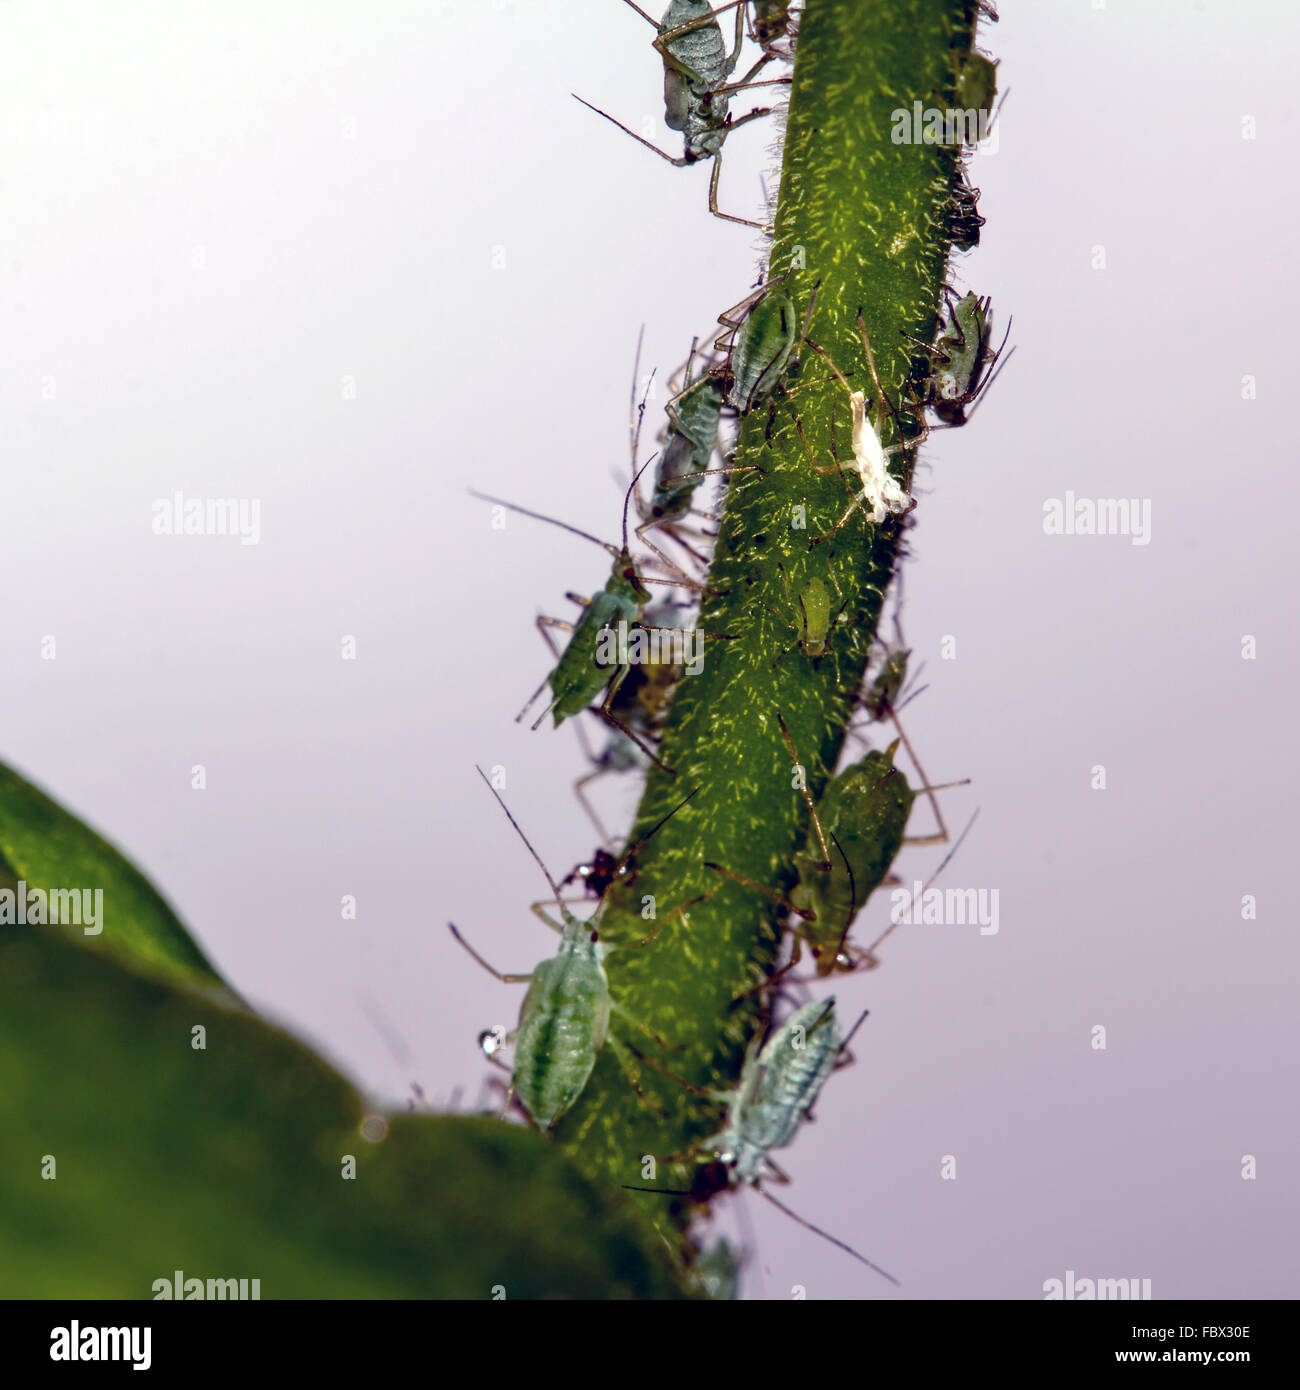 Aphids on a plant stem Stock Photo